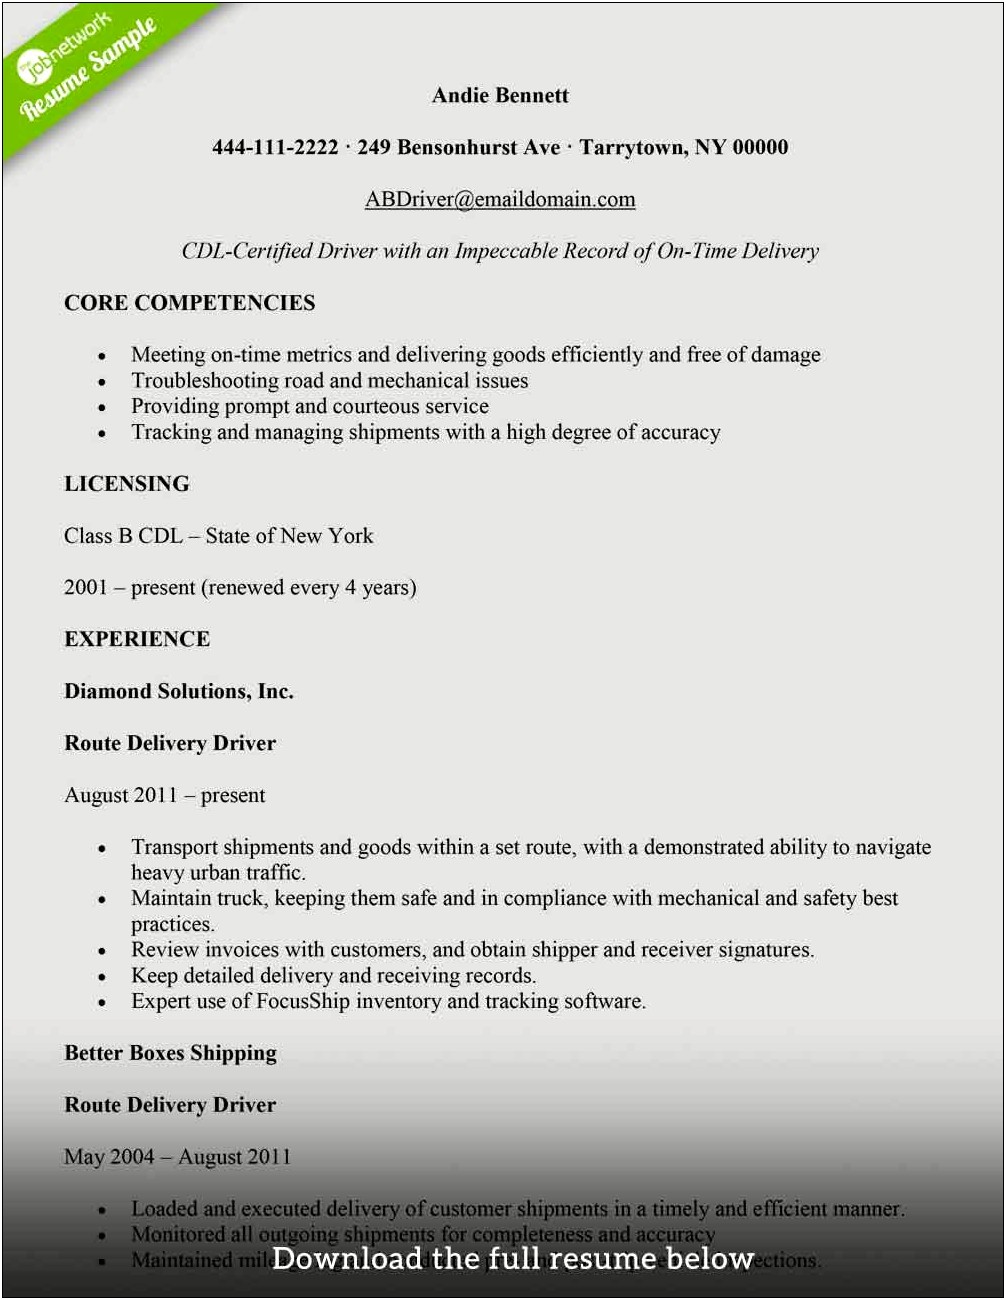 Resume Objective For A Truckingdispatcher